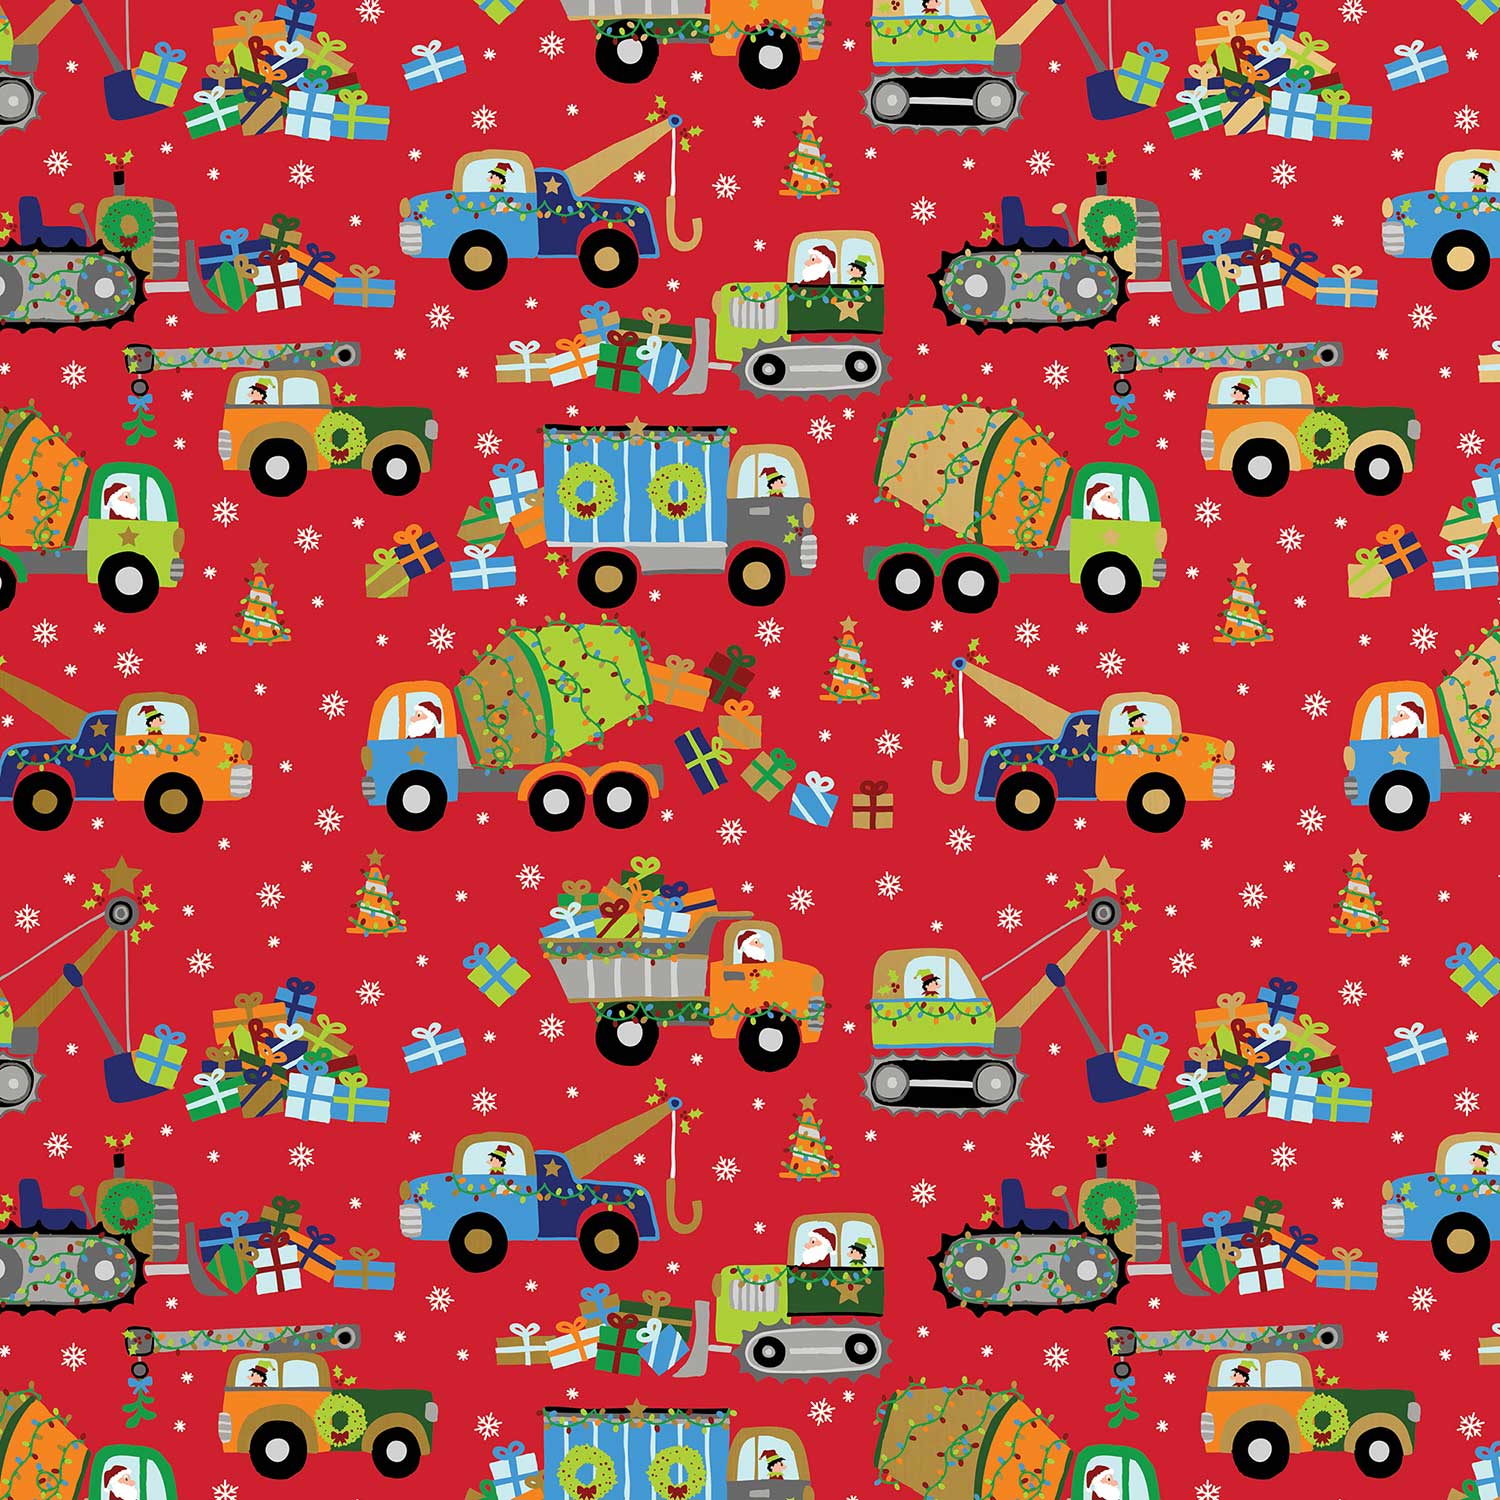 Sikiweiter Construction Wrapping Paper - 12 Sheets Construction Wrapping Paper Birthday with Trucks - 19.7 x 27.6 Inches per Sheet